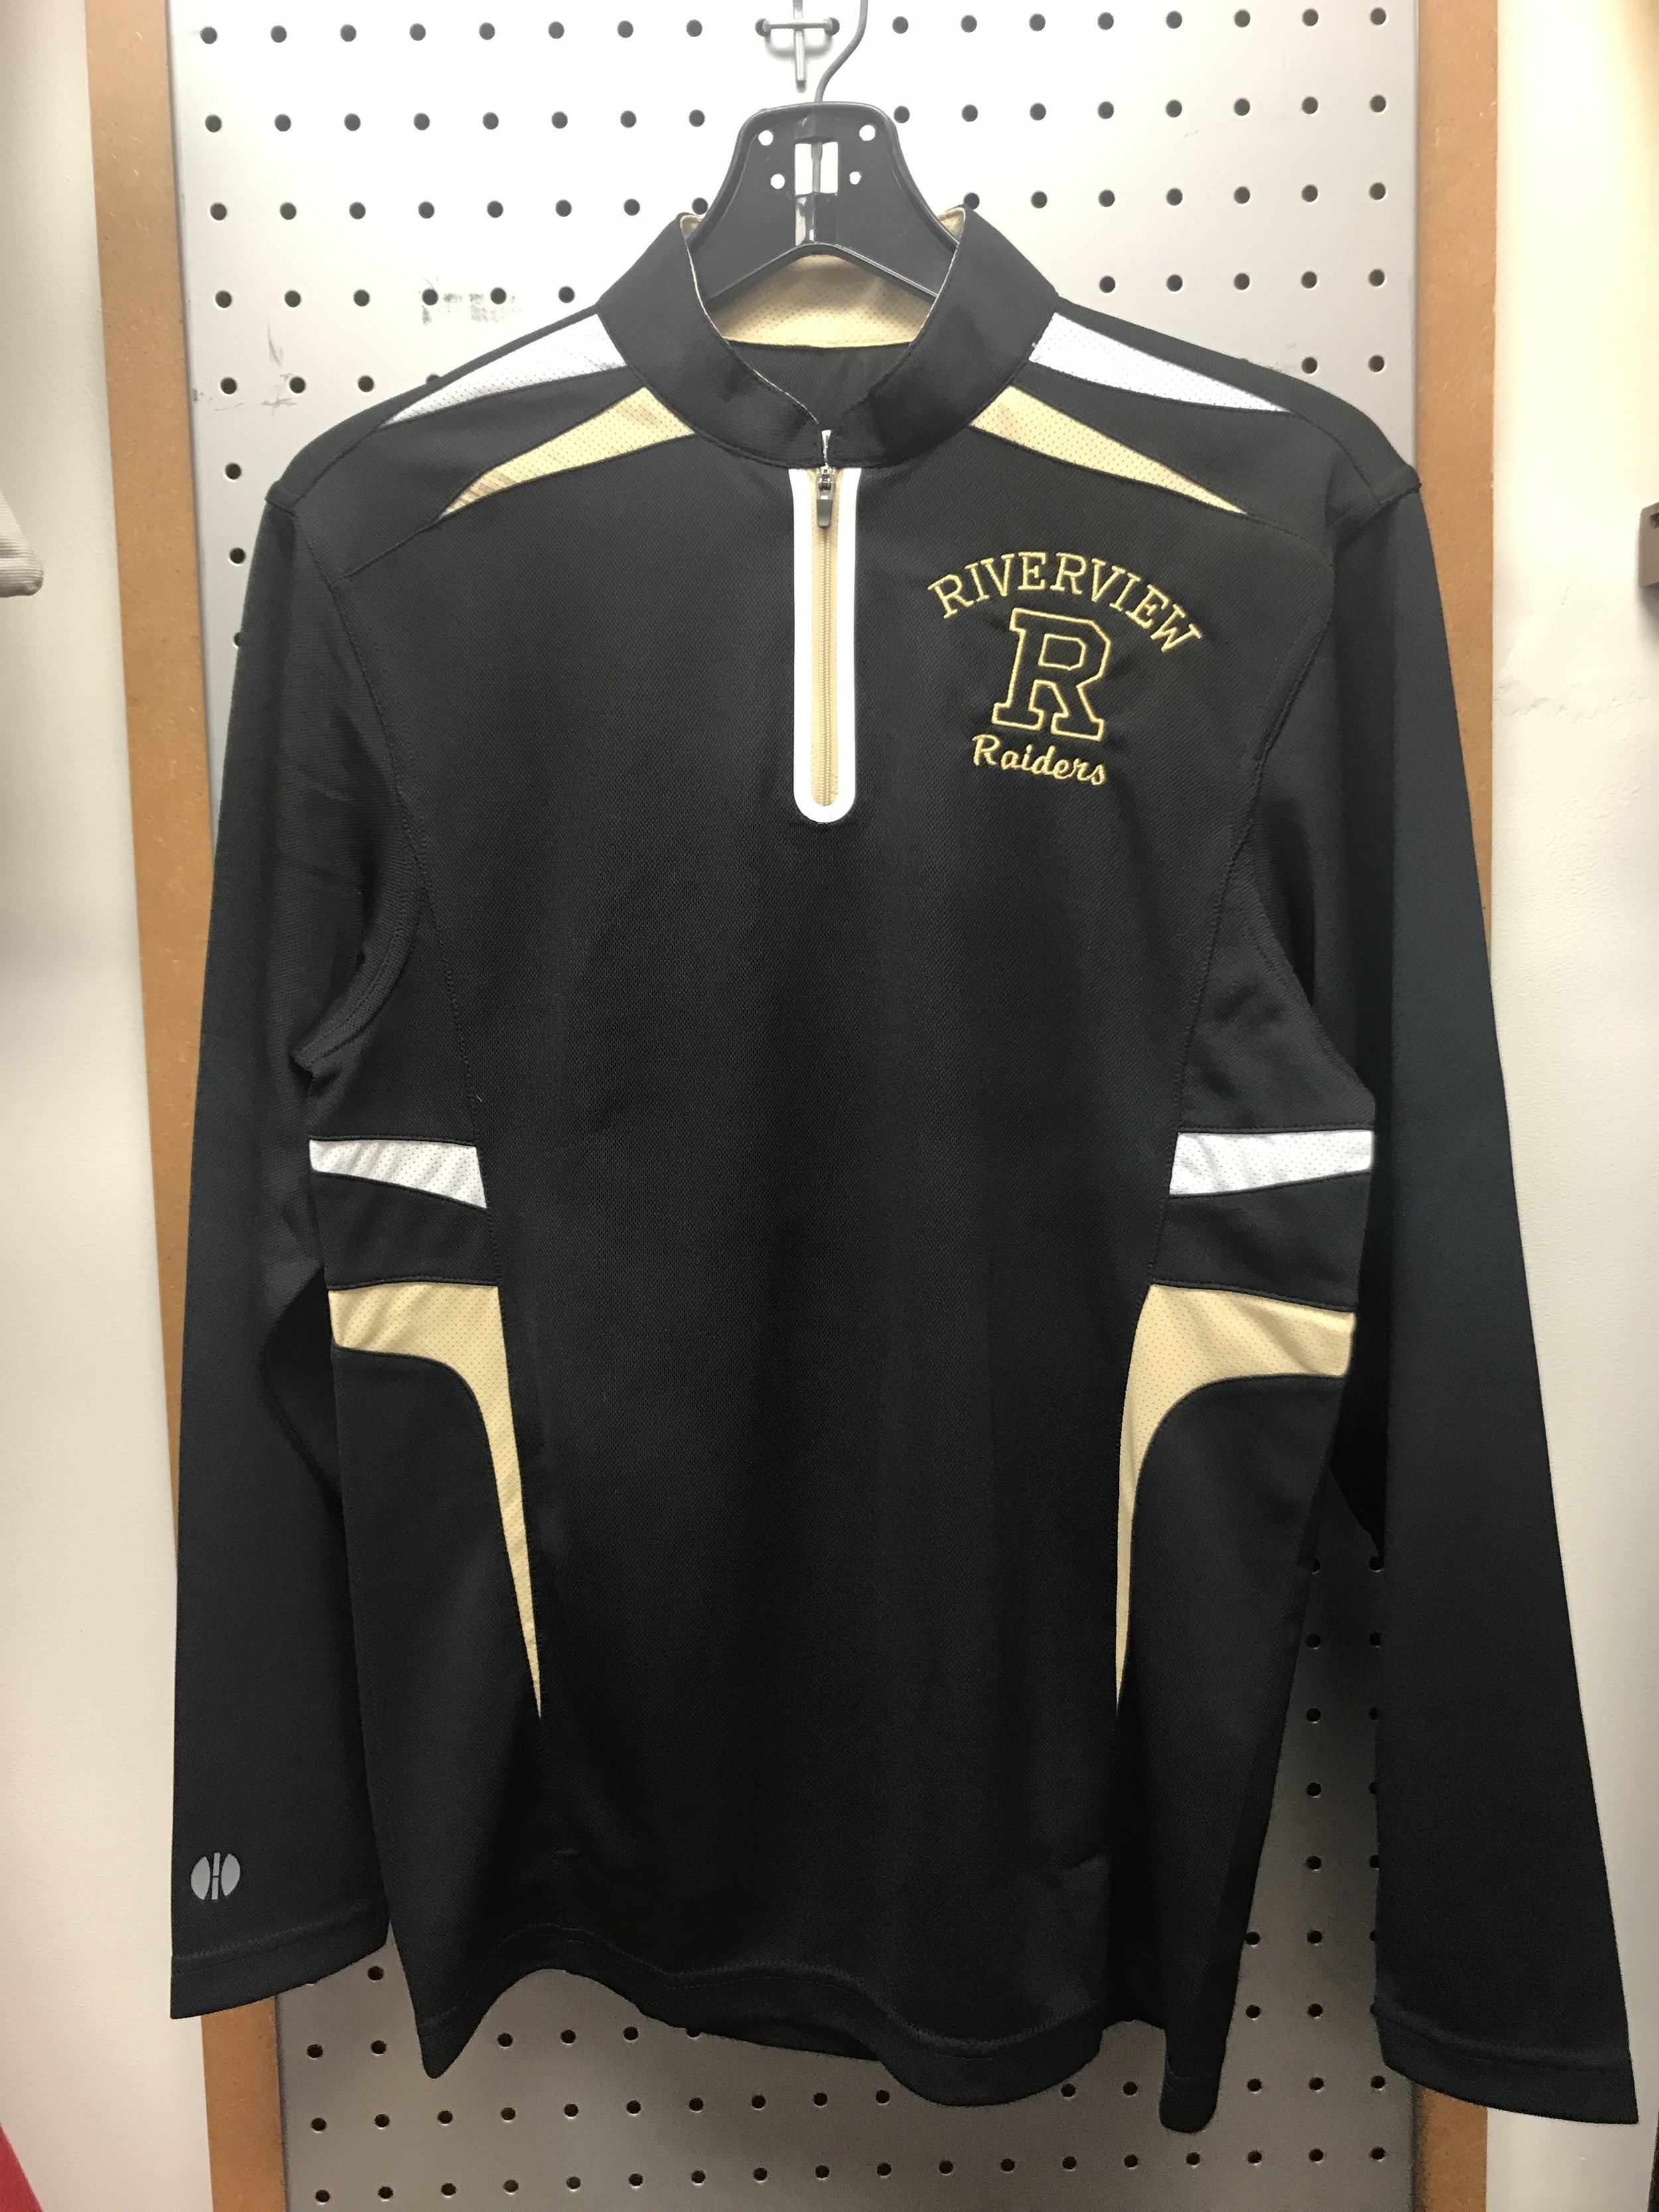 Riverview Spiritwear — Embroidery From The Heart